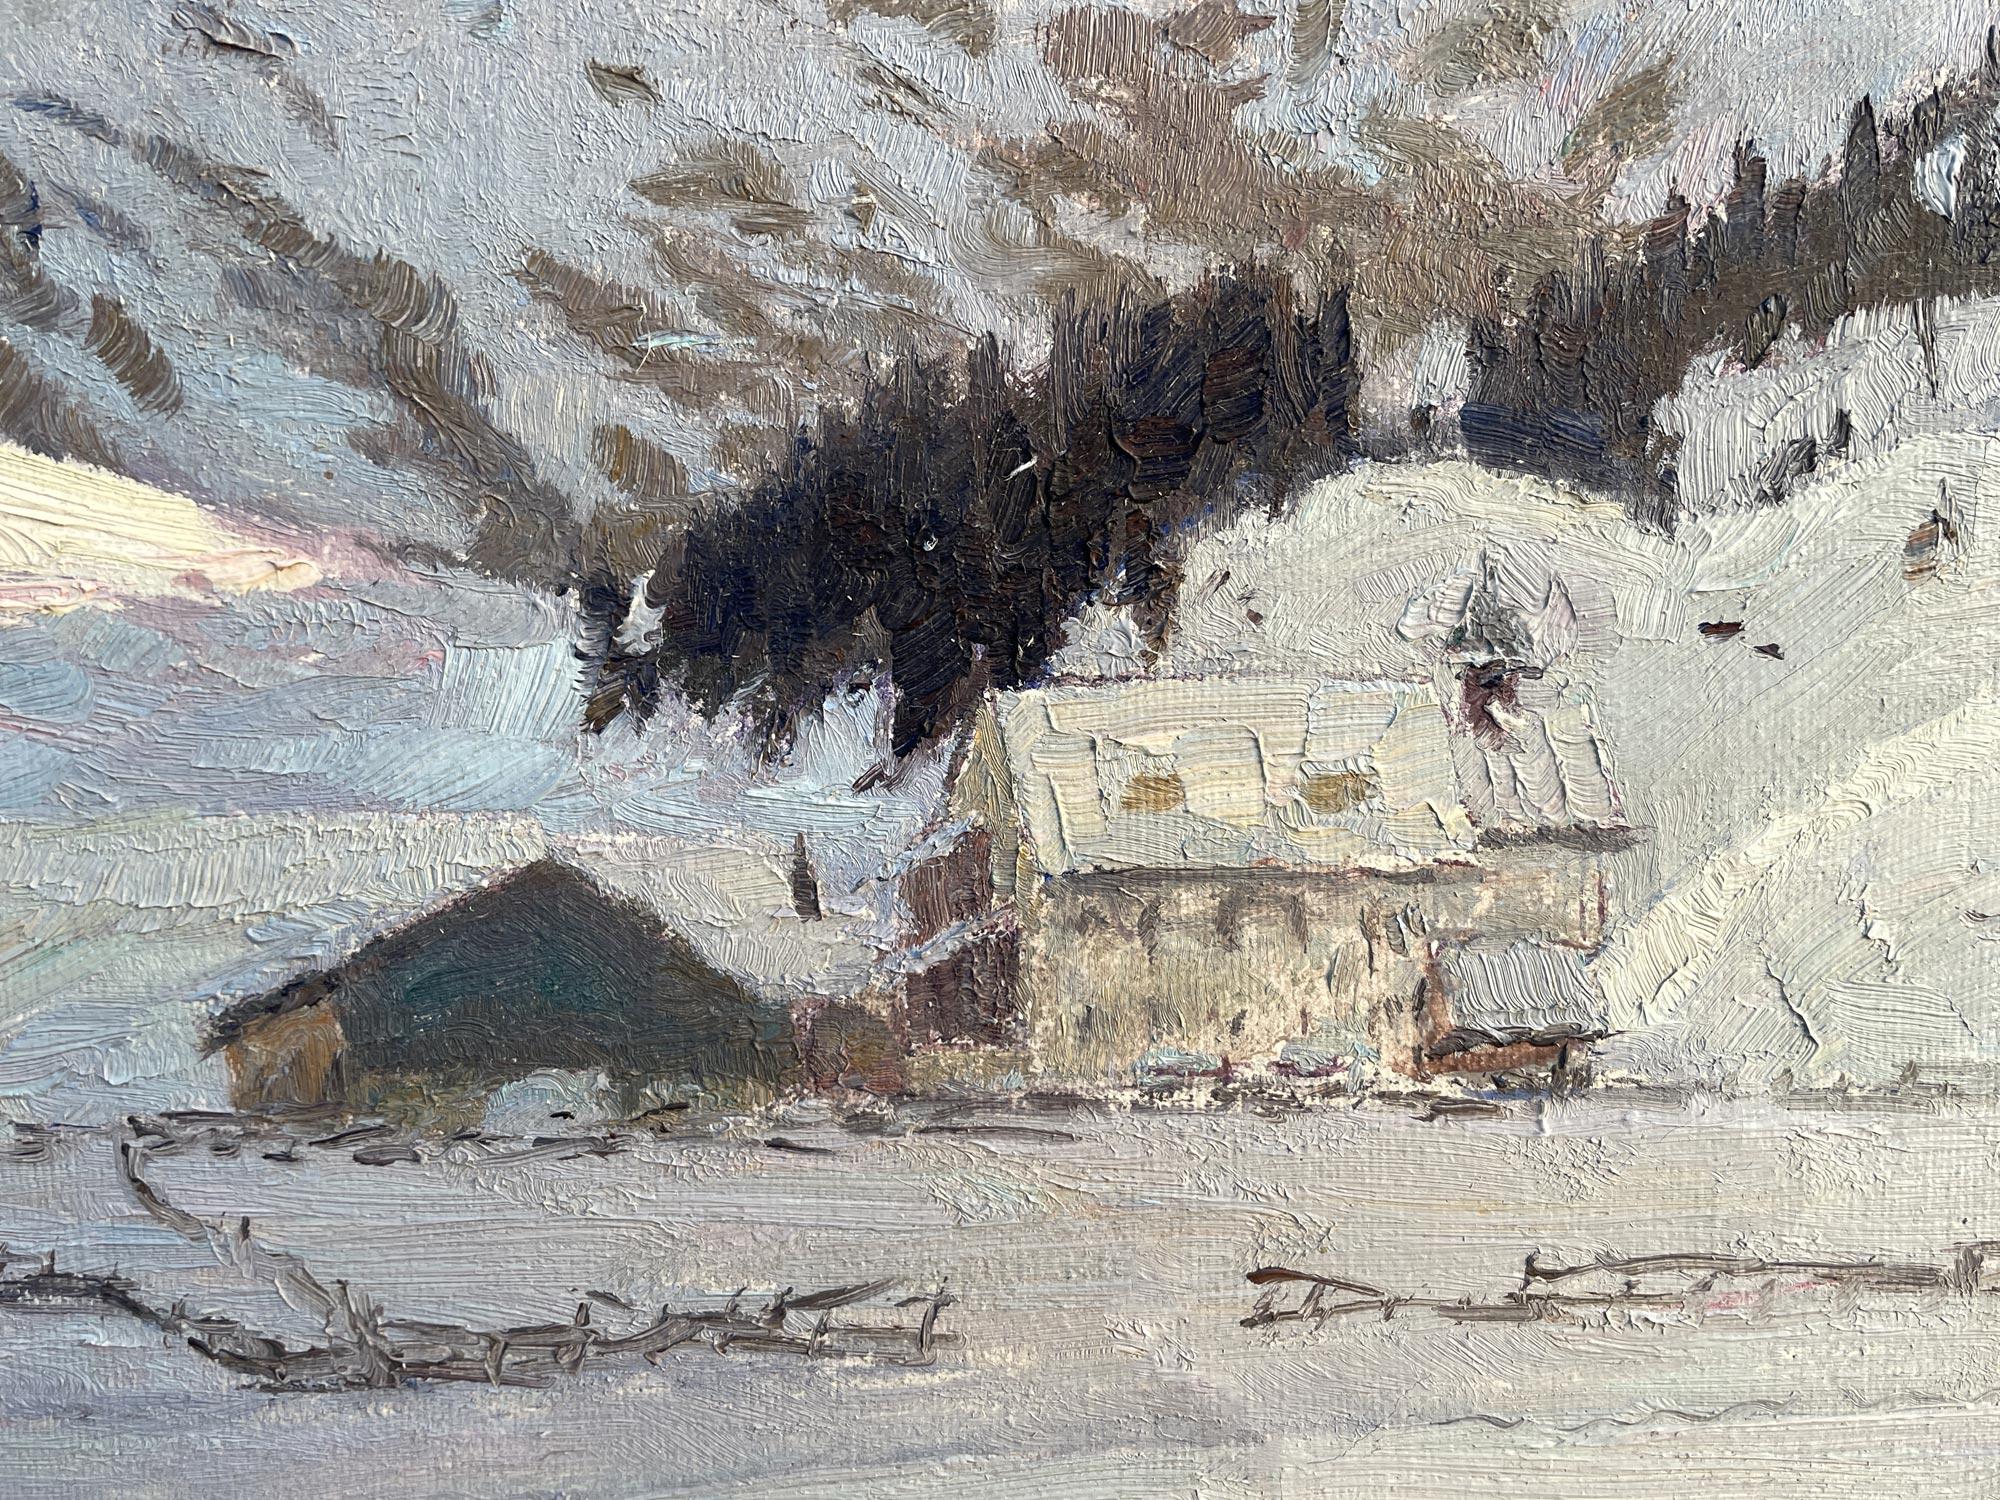 Mid-20th Century Snowy Landscape Oil On Canvas by Alex Weise - Dolomites 1930 For Sale